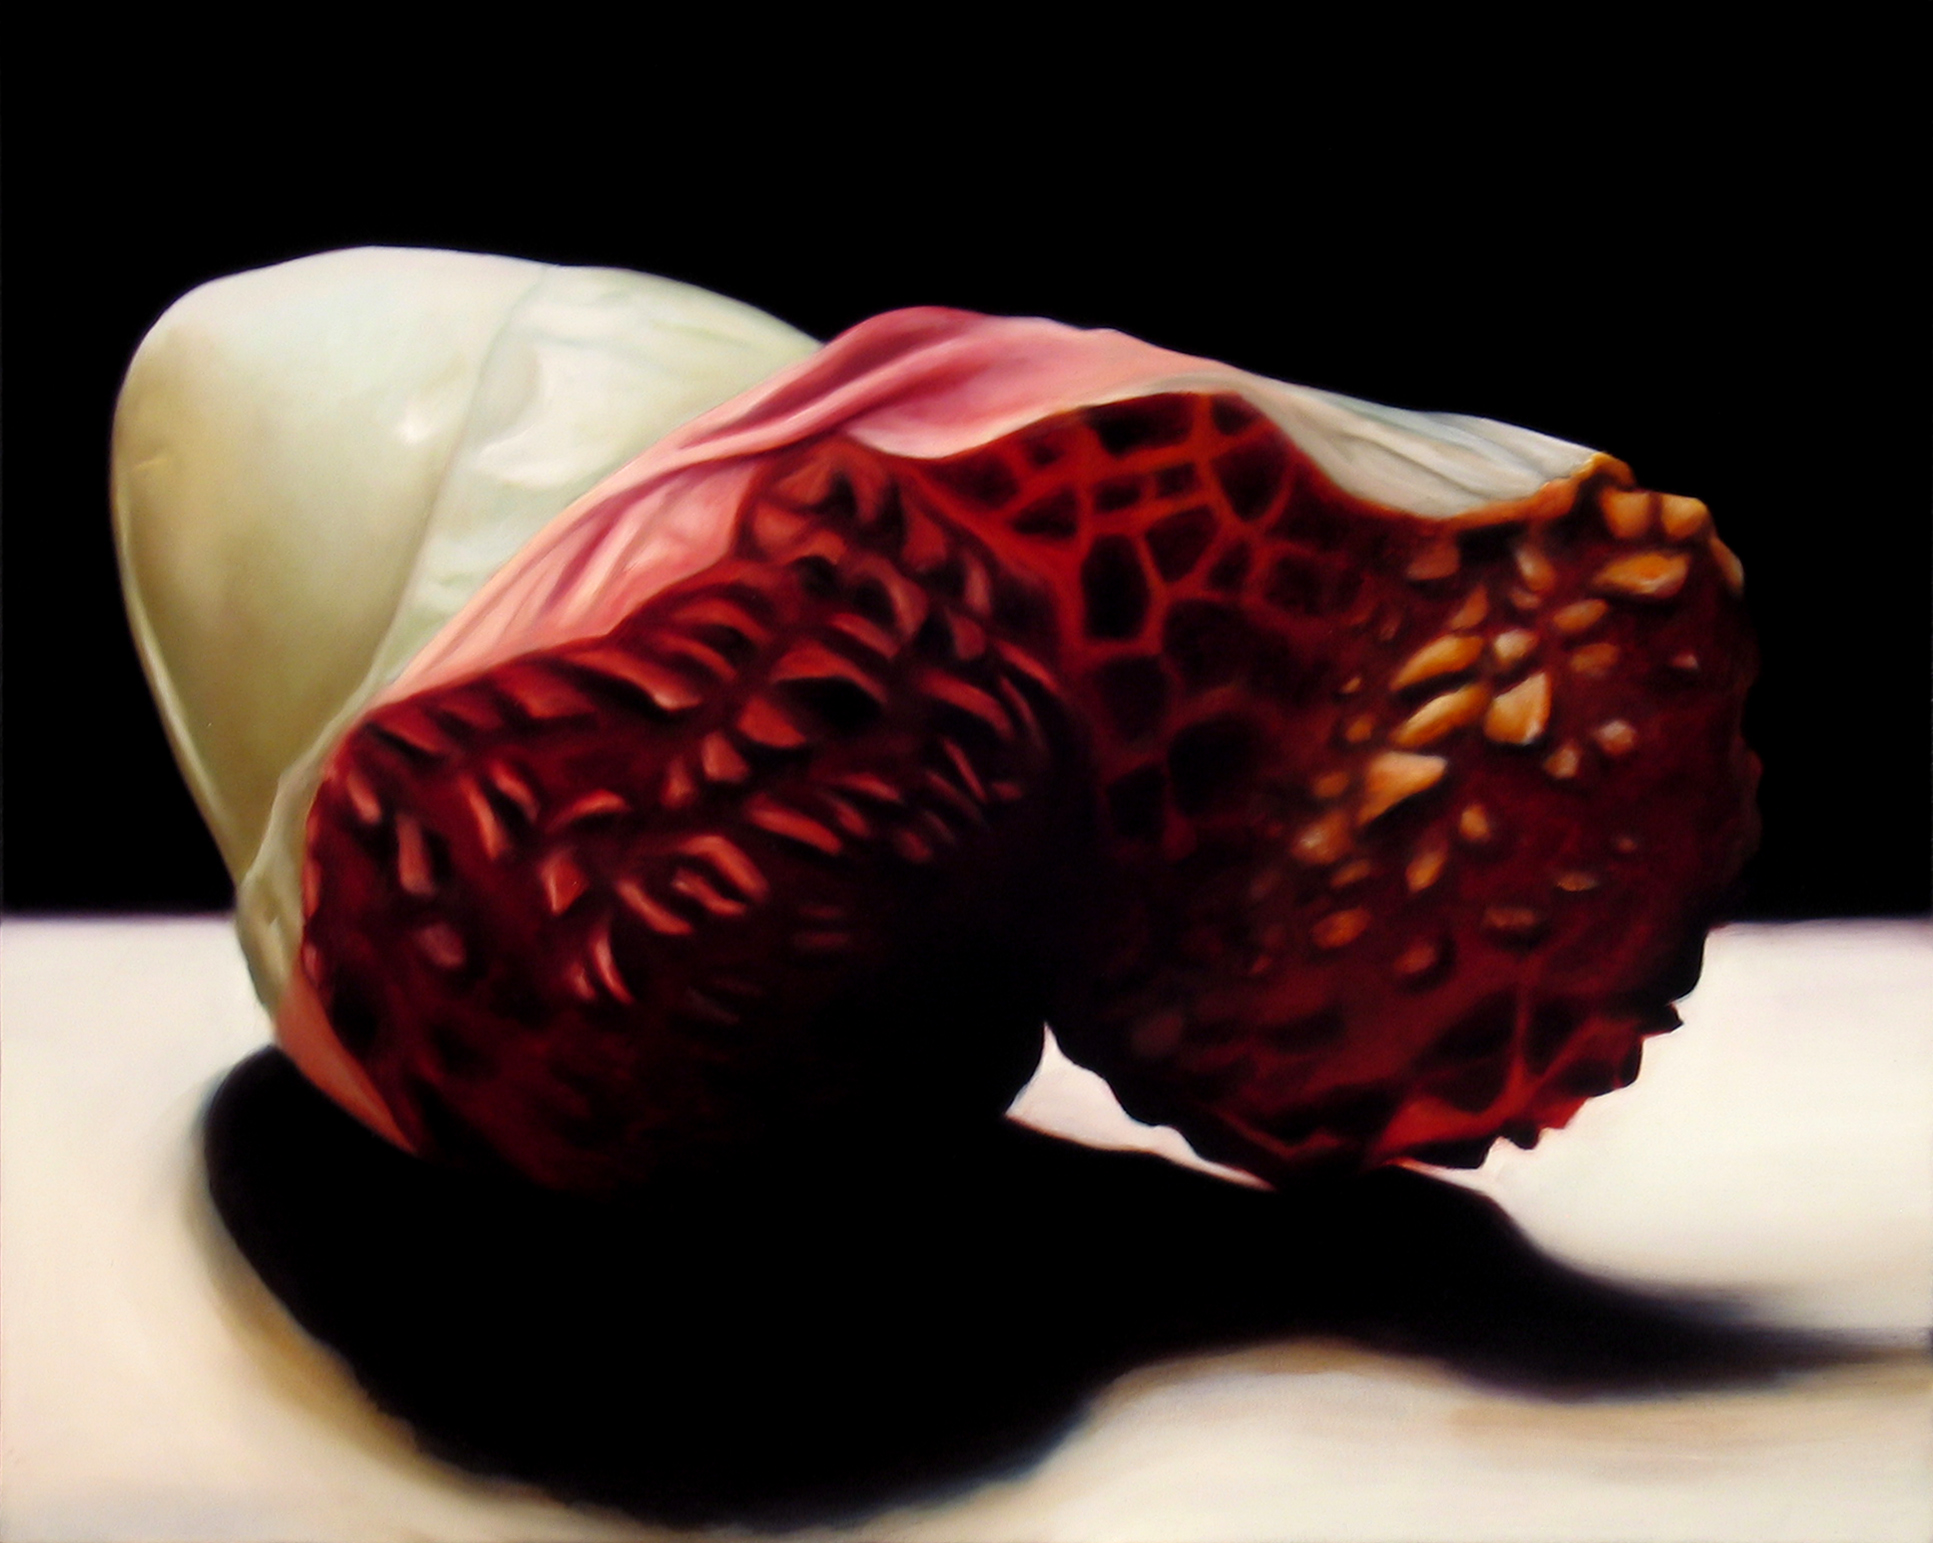 Lychee #2, 30" x 24", Oil on Canvas, 2006